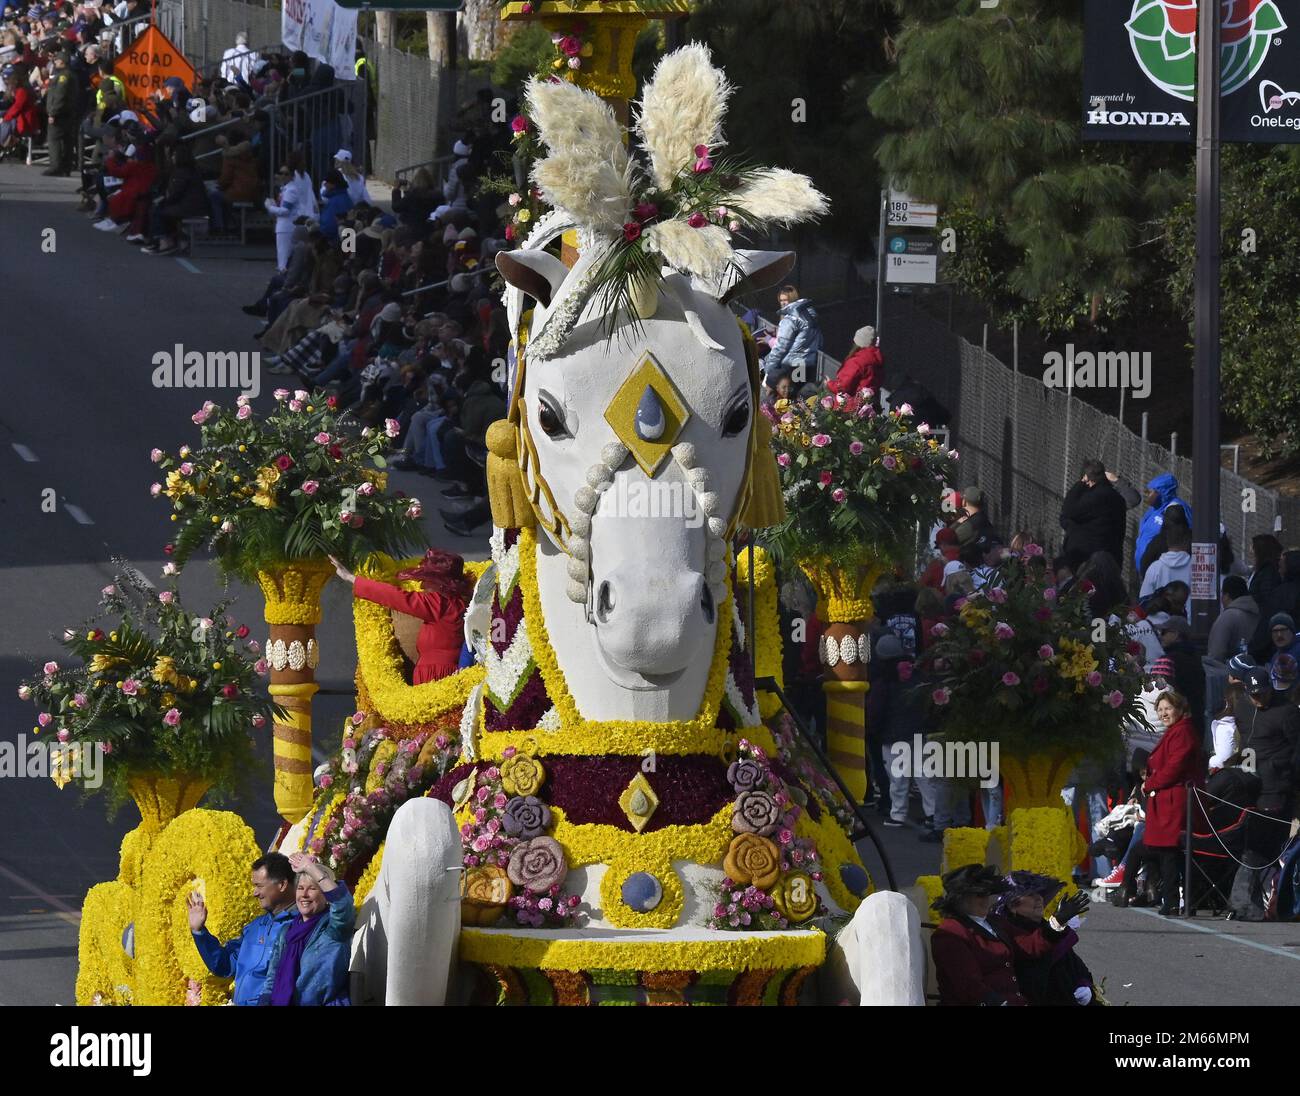 Pasadena, United States. 02nd Jan, 2023. Rotary's 'Serving with Imagination and Hope''' float, winner of the Princess Award, makes its way down Colorado Boulevard during the 134th annual Tournament of Roses Parade held in Pasadena, California on Monday, January 2, 2023. Photo by Jim Ruymen/UPI. Credit: UPI/Alamy Live News Stock Photo